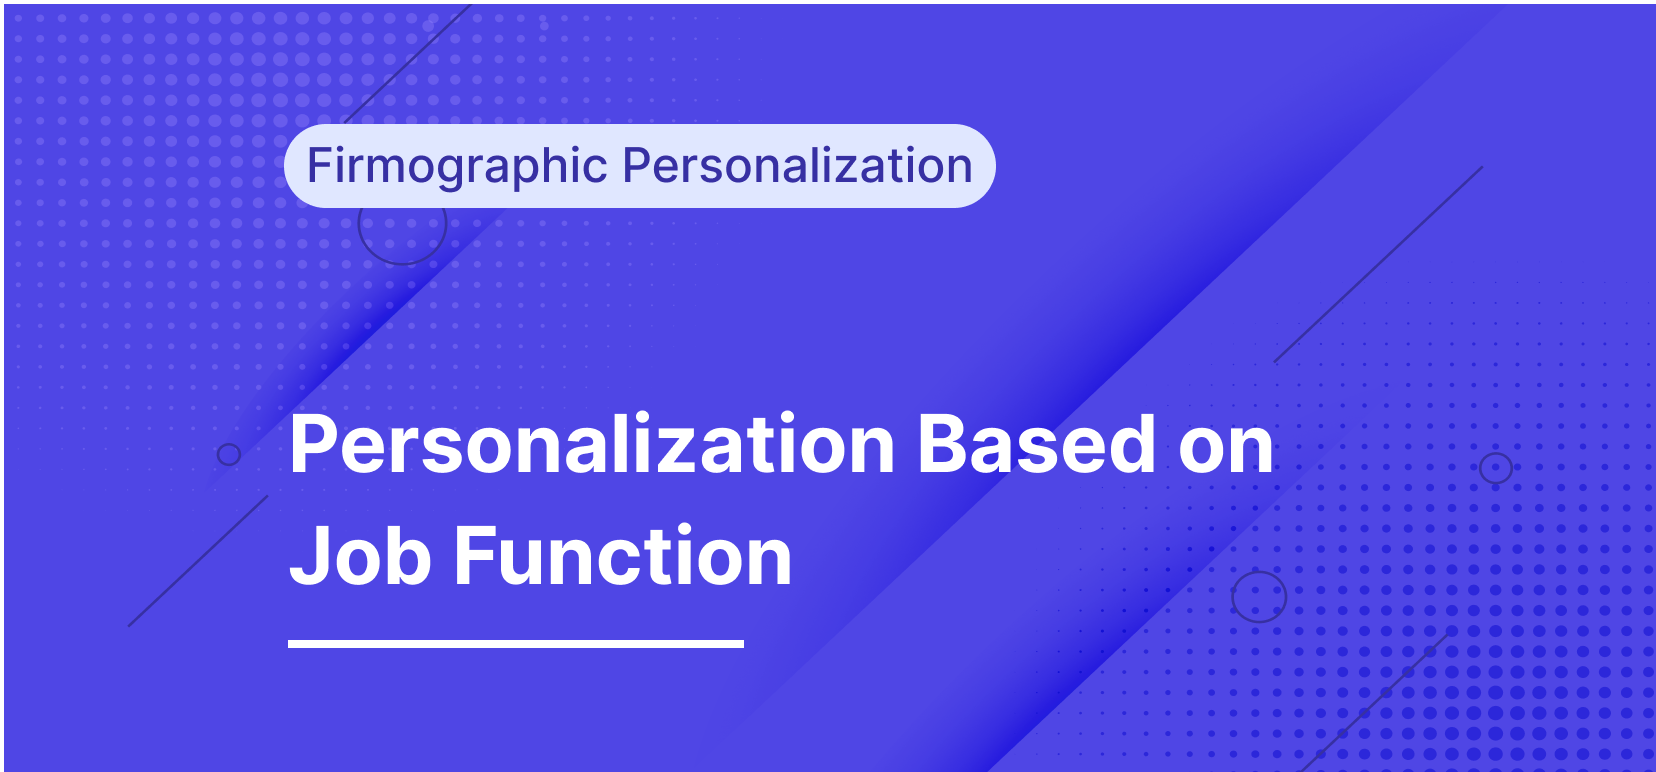 Personalize the Value Proposition Based on Job Function